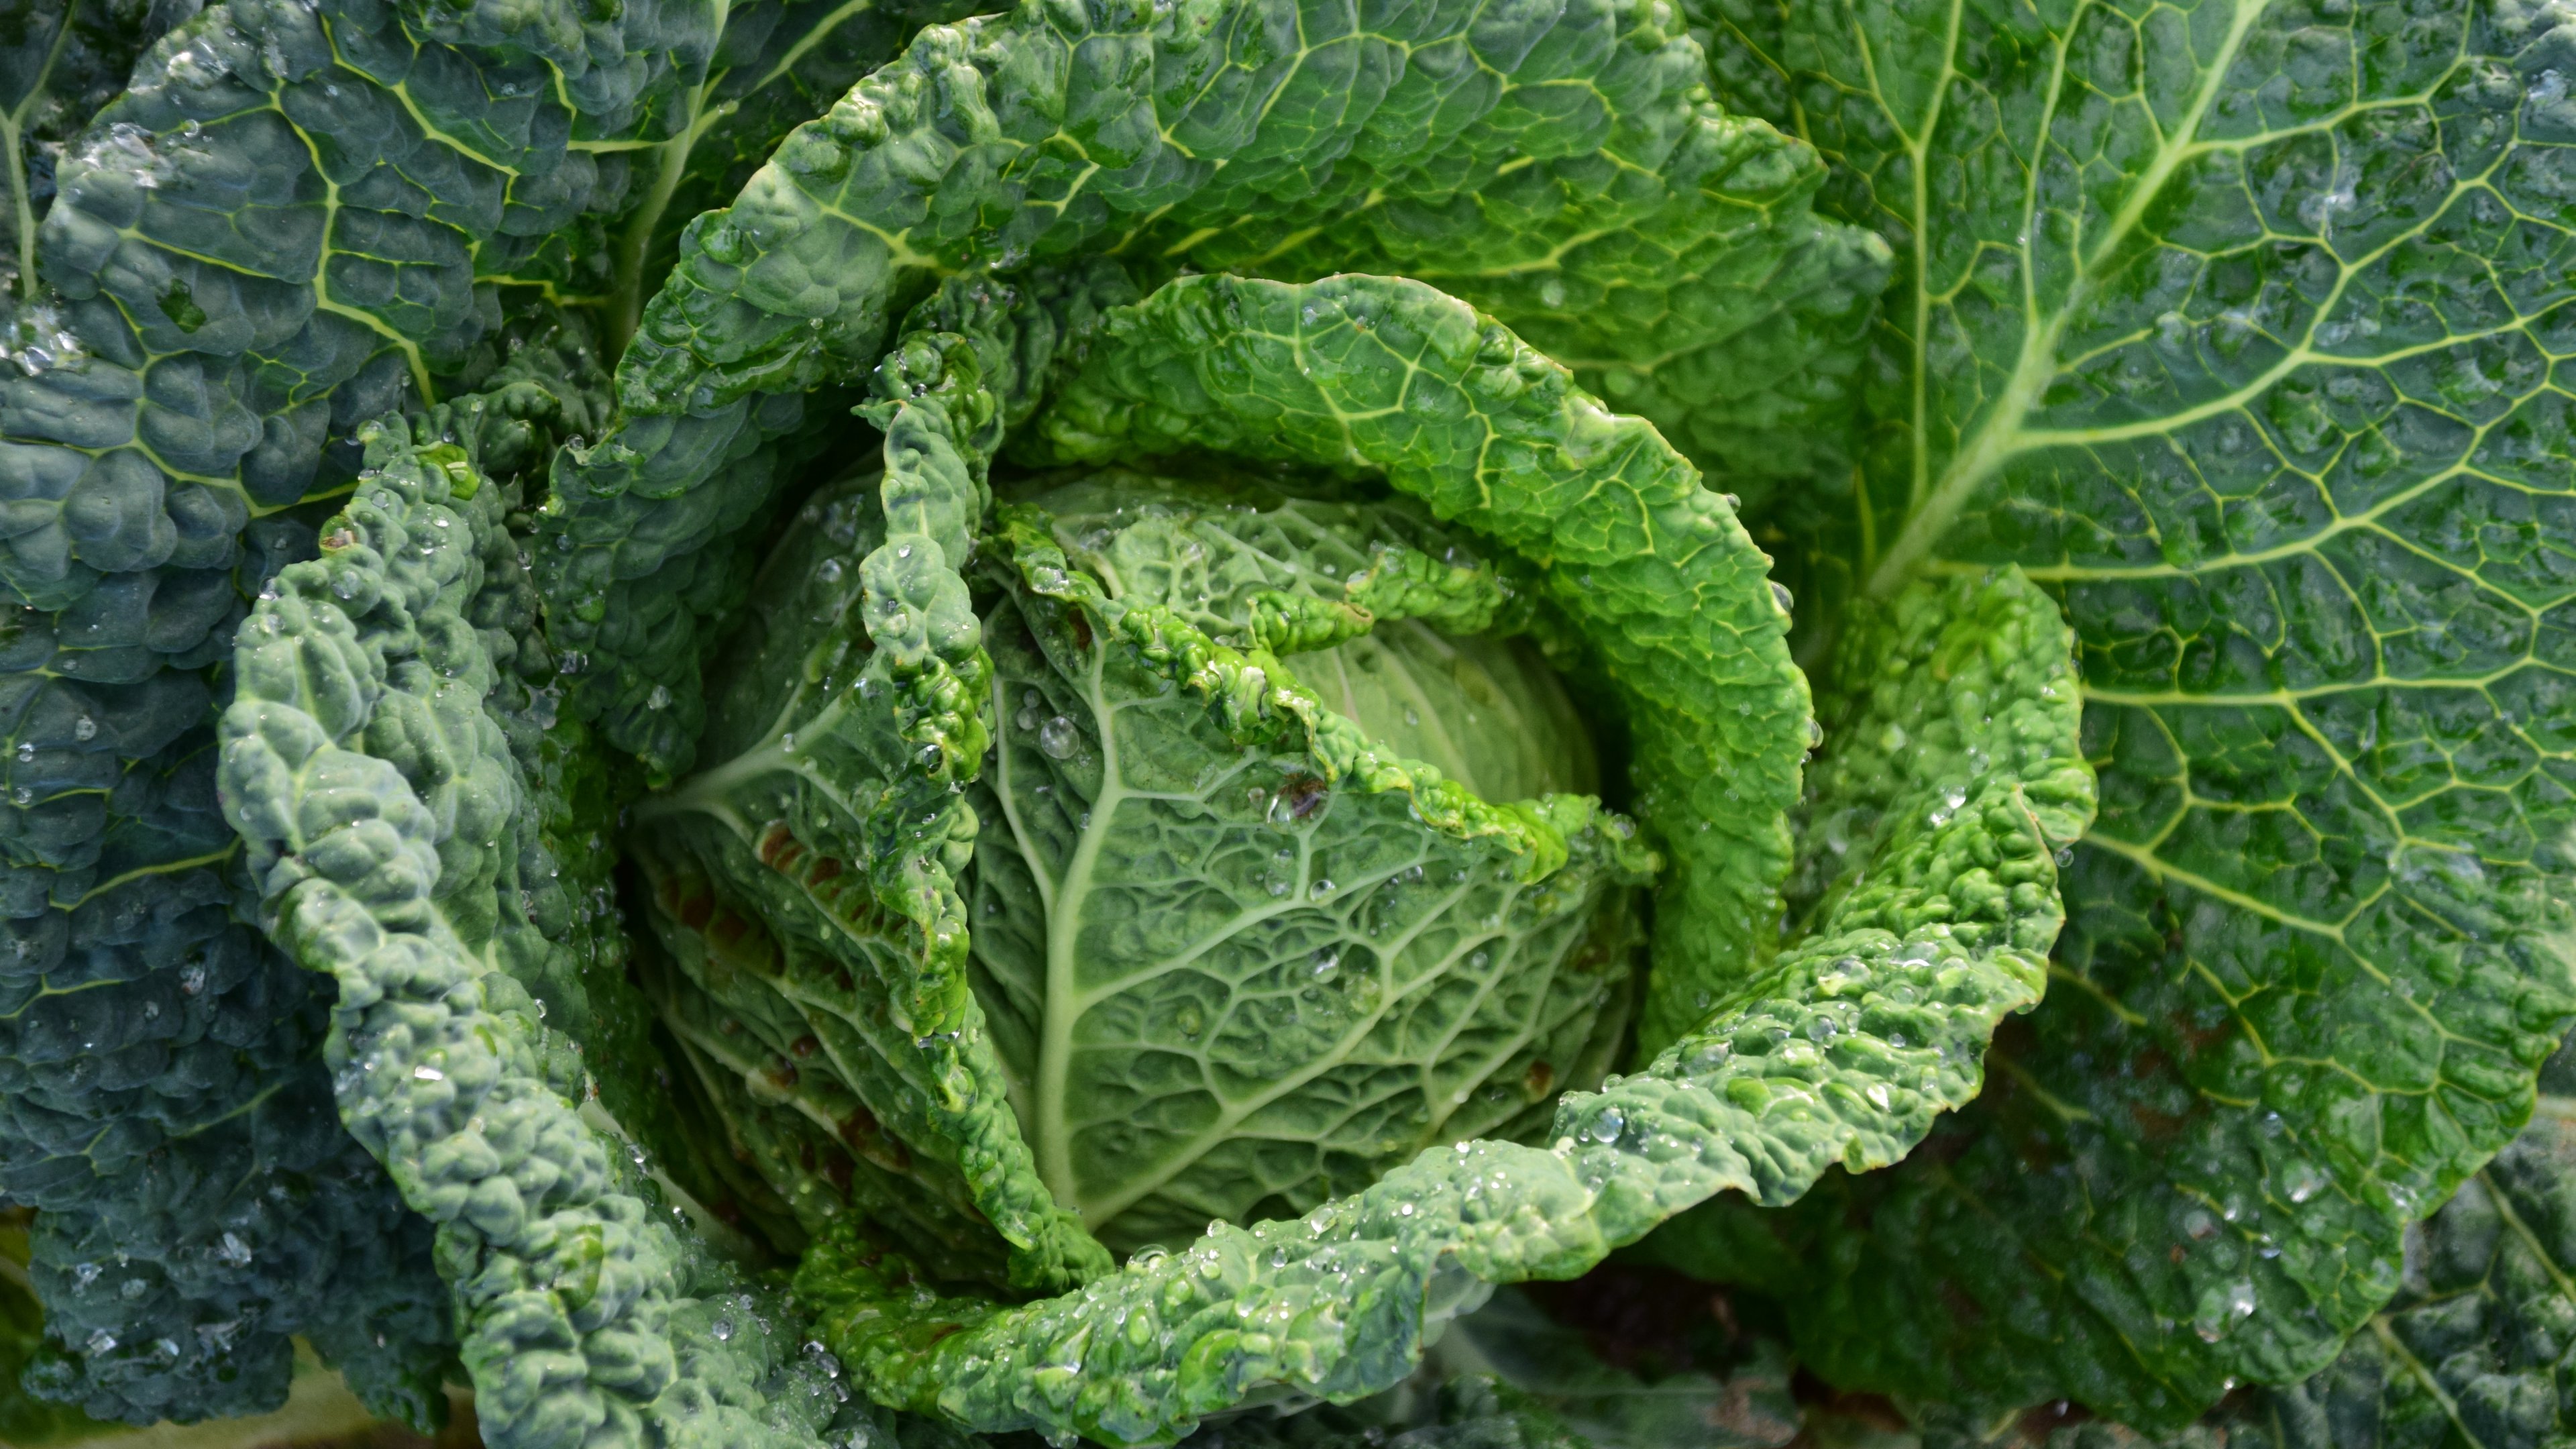 Green Cabbage Wallpaper iPhone Android Desktop Background